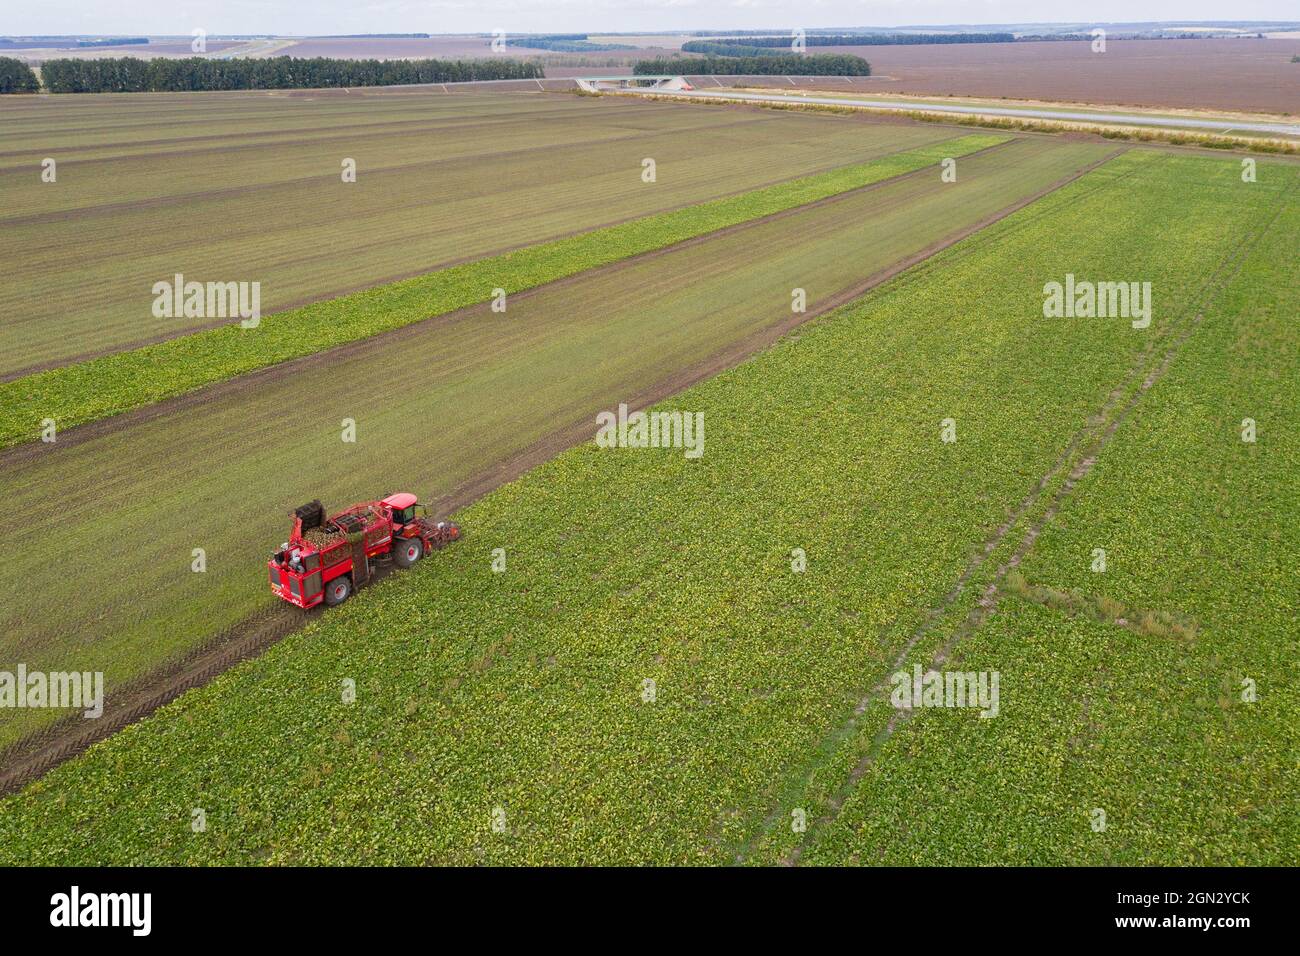 Combine harvester harvests sugar beet on the field. Aerial view Stock Photo